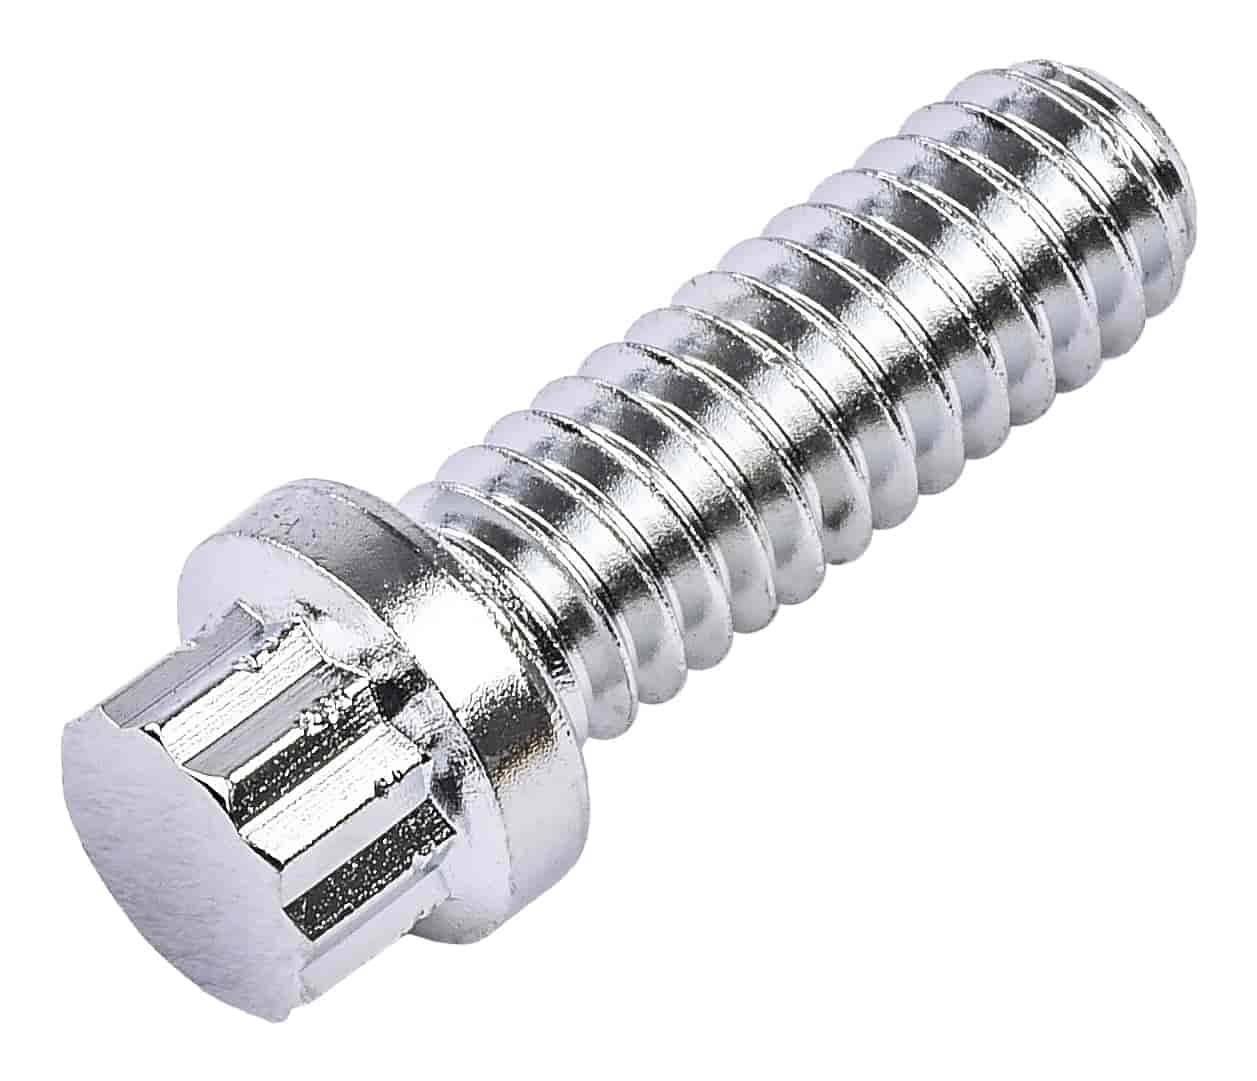 12-Point Fastener [1/4 in. -20 Thread x 3/4 (.750) in. Length]